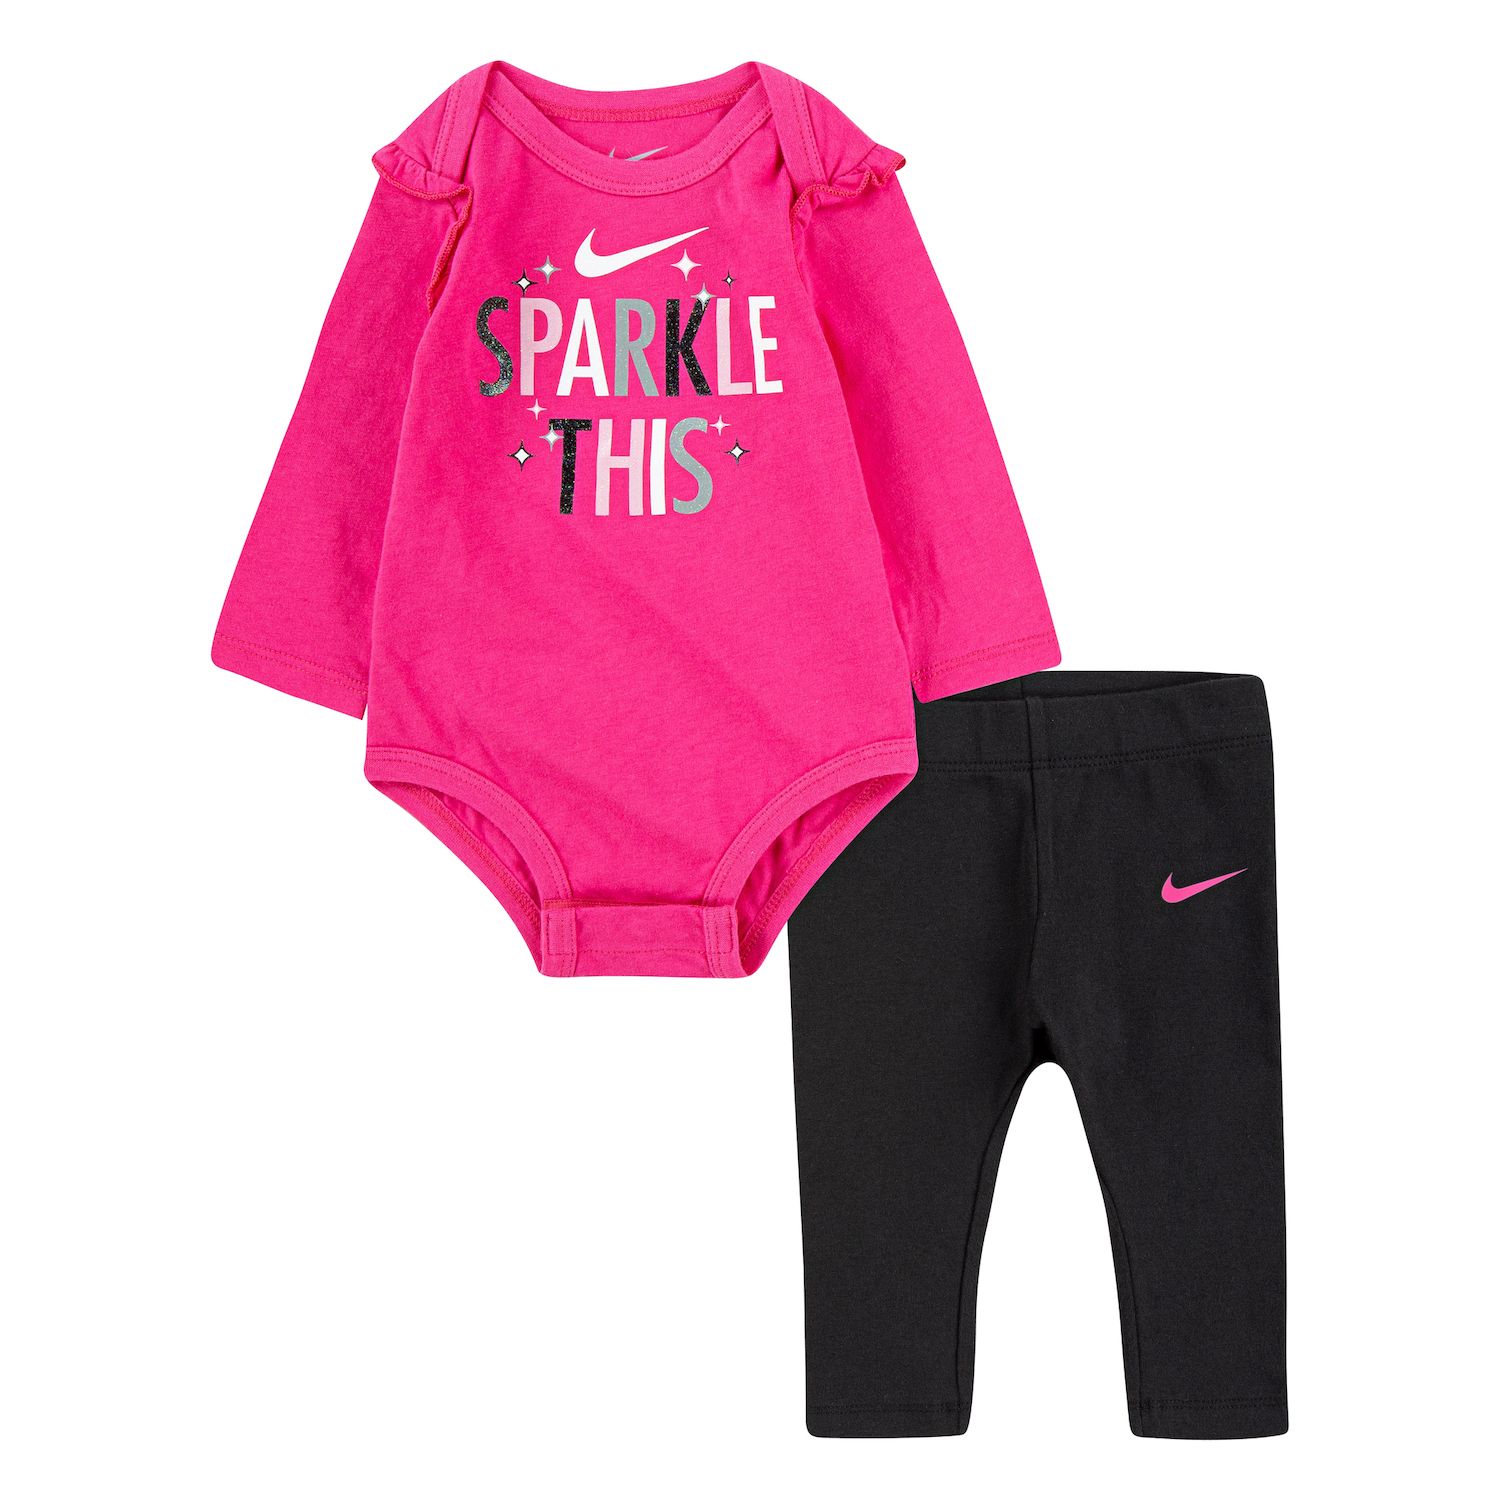 18 month old nike outfits